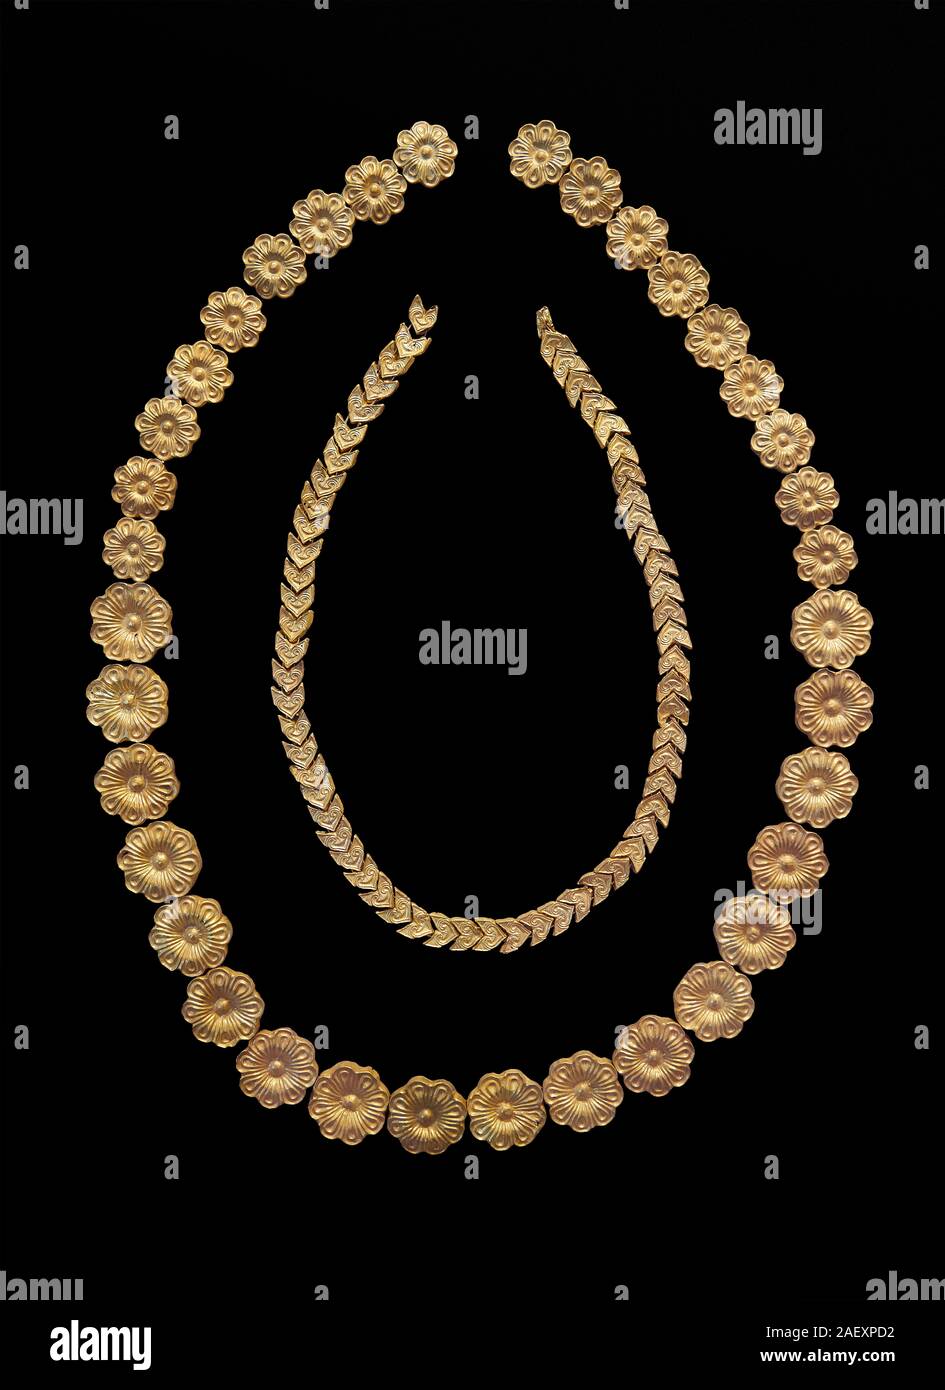 Mycenaean gold necklace from the Mycenaean cemetery of Midea tholos tomb ,  Dendra, Greece. National Archaeological Museum Athens. Black Background In  Stock Photo - Alamy